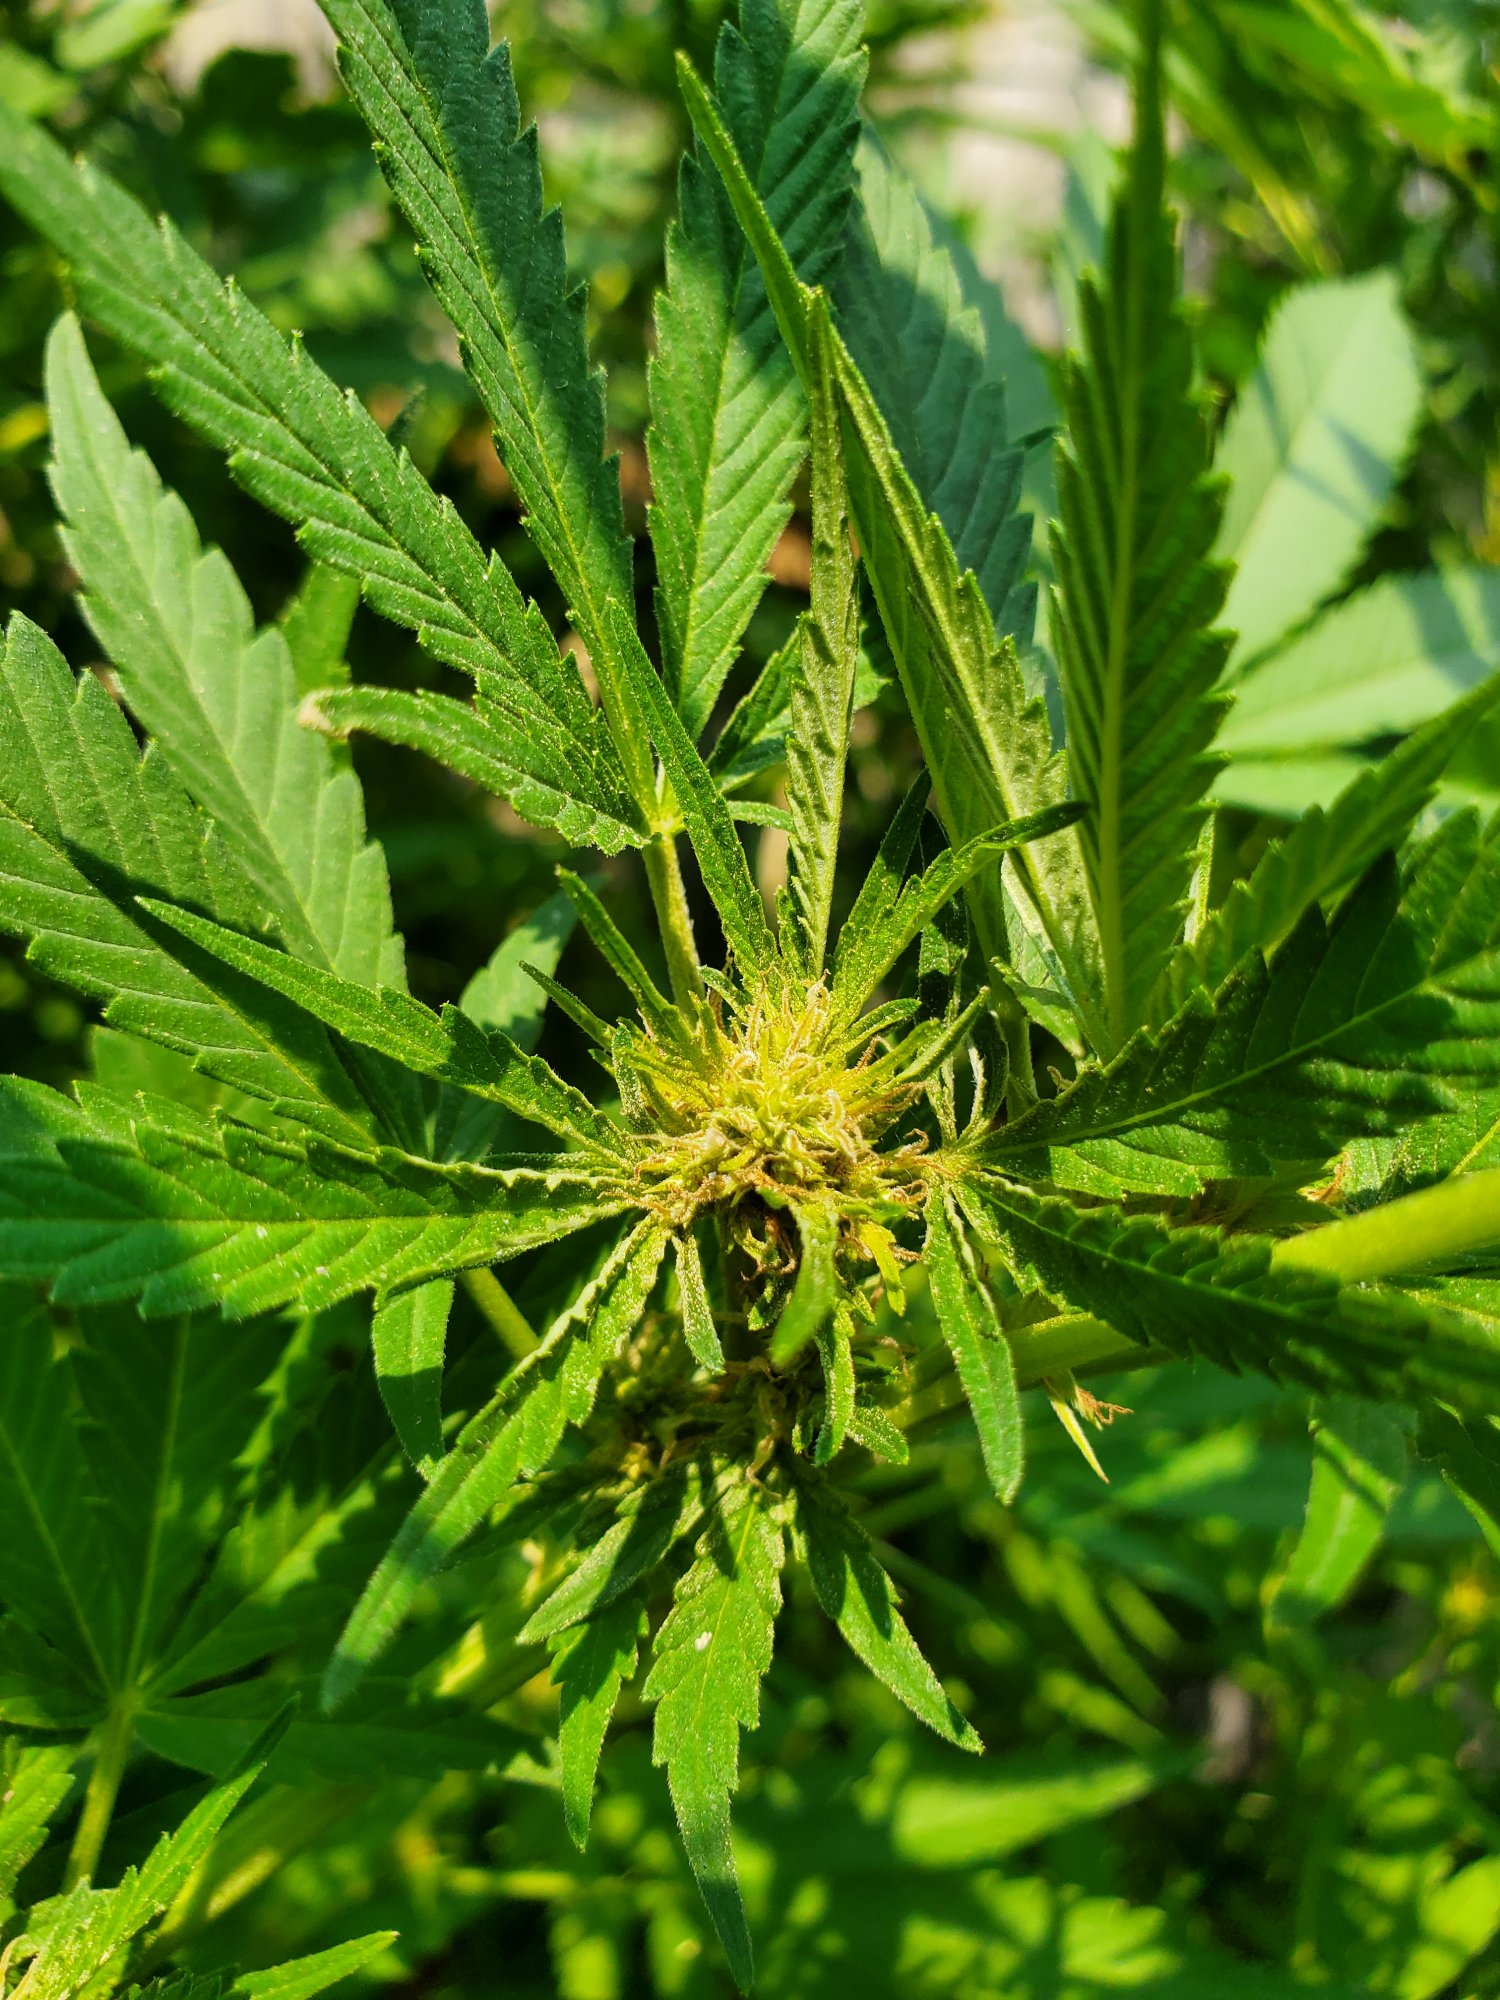 Please help what is wrong with my flowers same age same nutrients 6